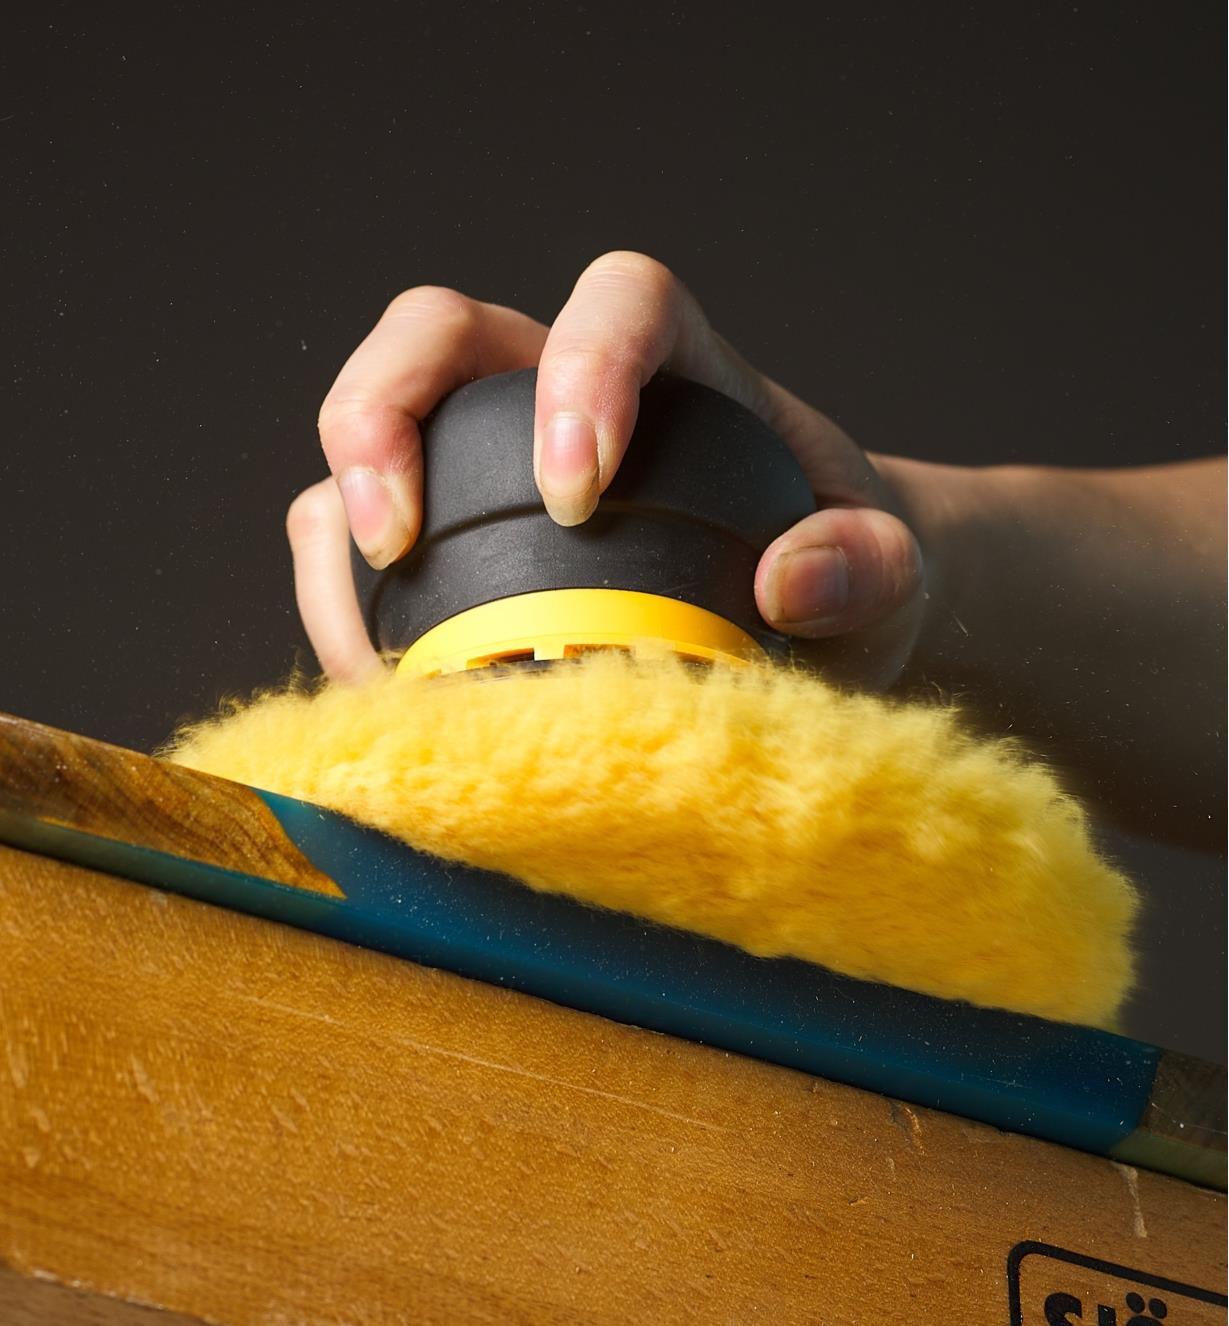 Polishing a wood surface with a Mirka 6" yellow lamb's wool pro pad affixed to a 6" orbital sander and polisher